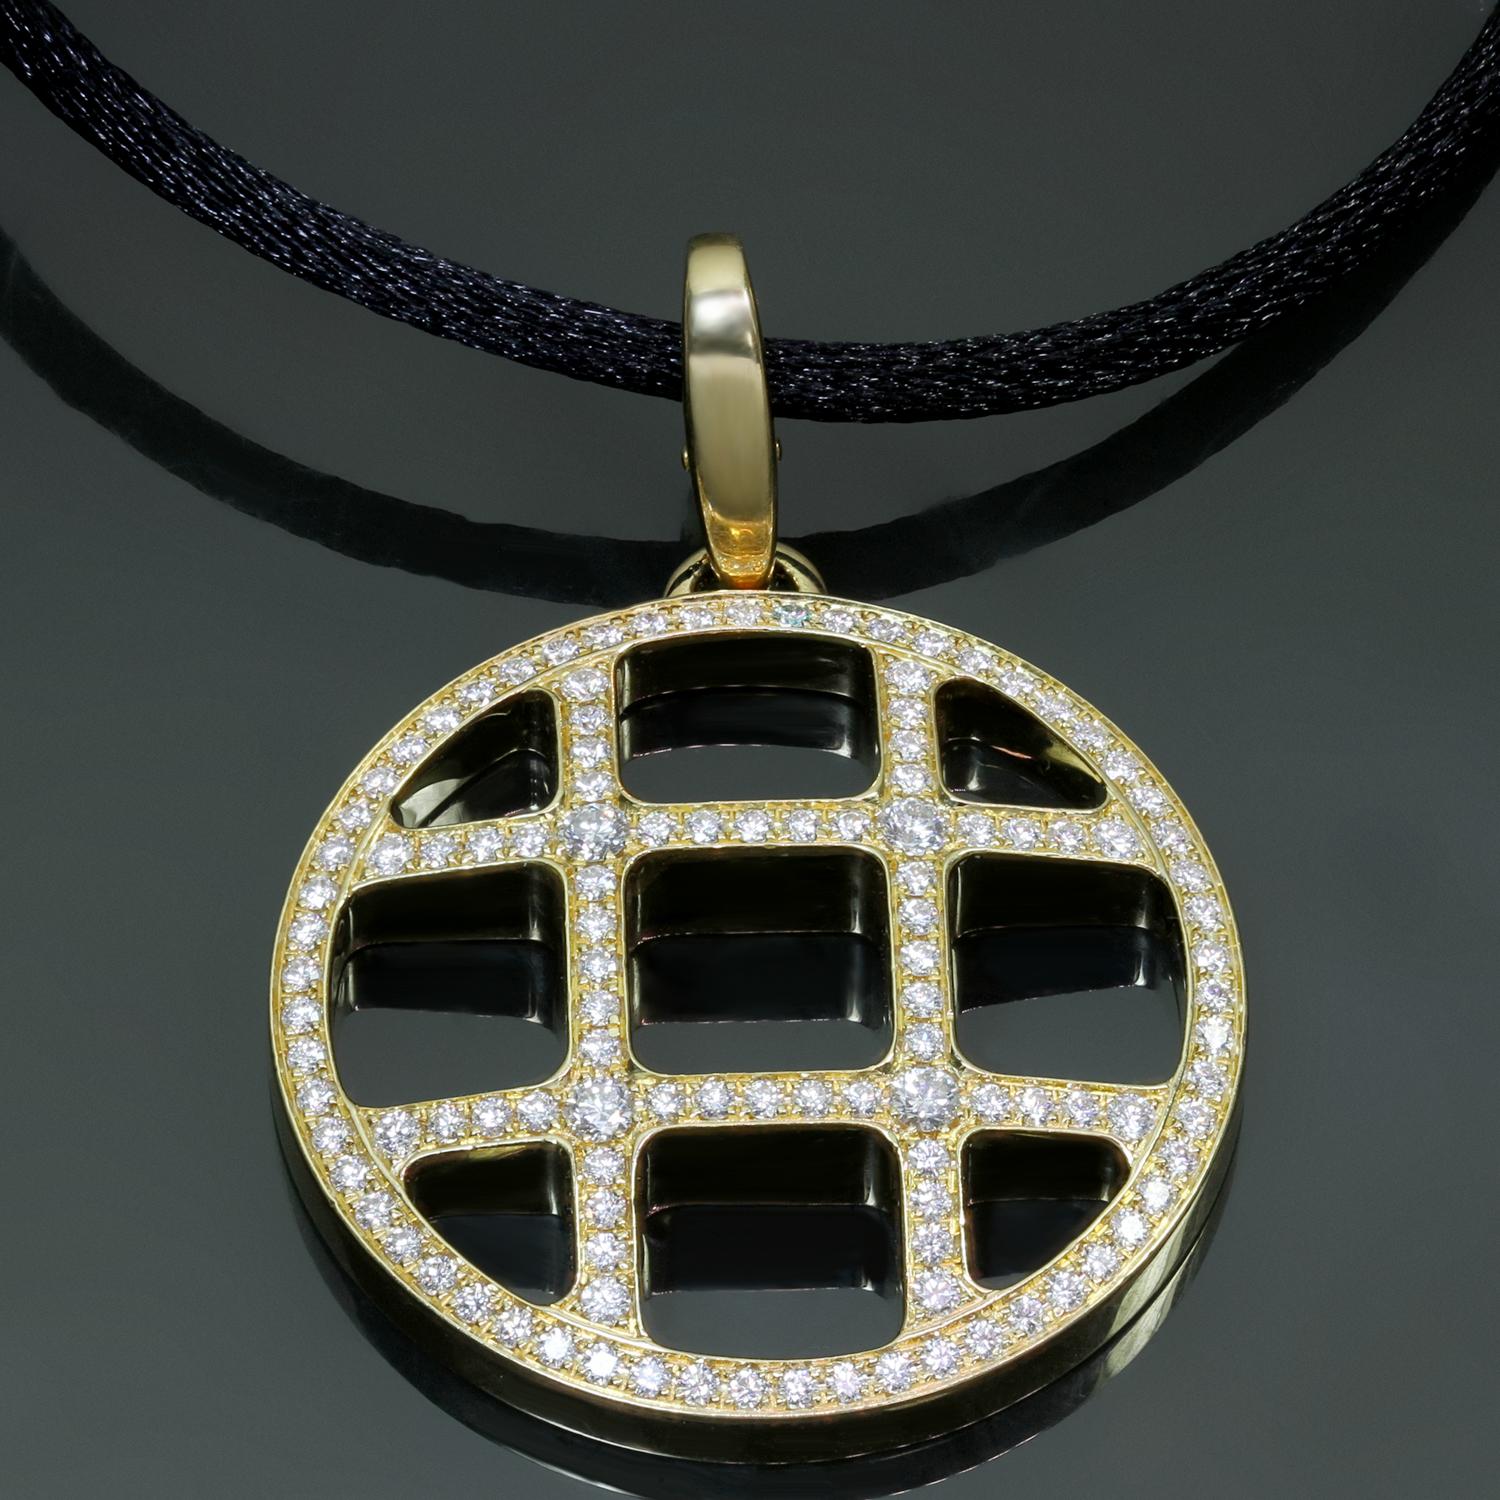 This gorgeous Pasha De Cartier openwork circle pendant enhancer is crafted in 18k yellow gold, pave-set with brilliant-cut round D-E-F VVS1-VVS2 diamonds and completed with an adjustable black silk cord. Made in France circa 1990s. Measurements: